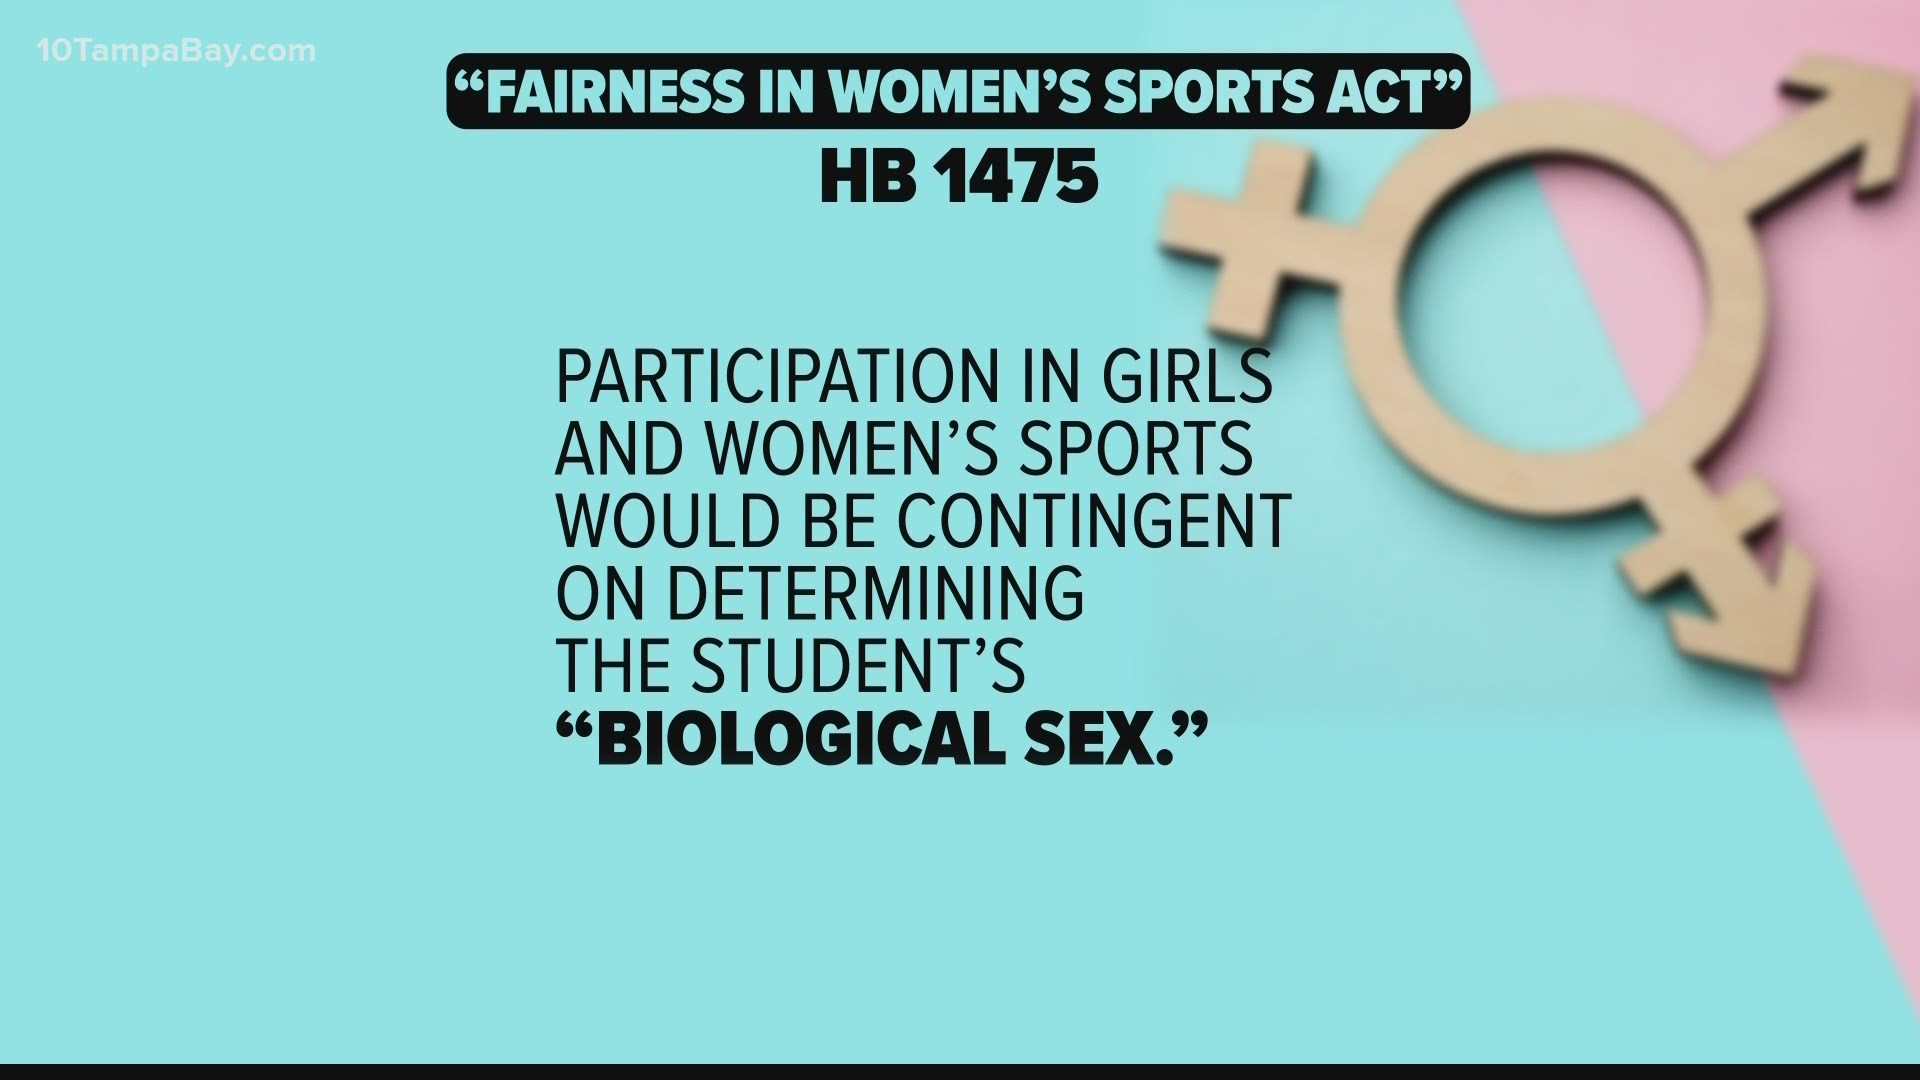 The transgender athlete ban requires athletes to compete on teams determined by the biological sex recorded on their birth certificates.